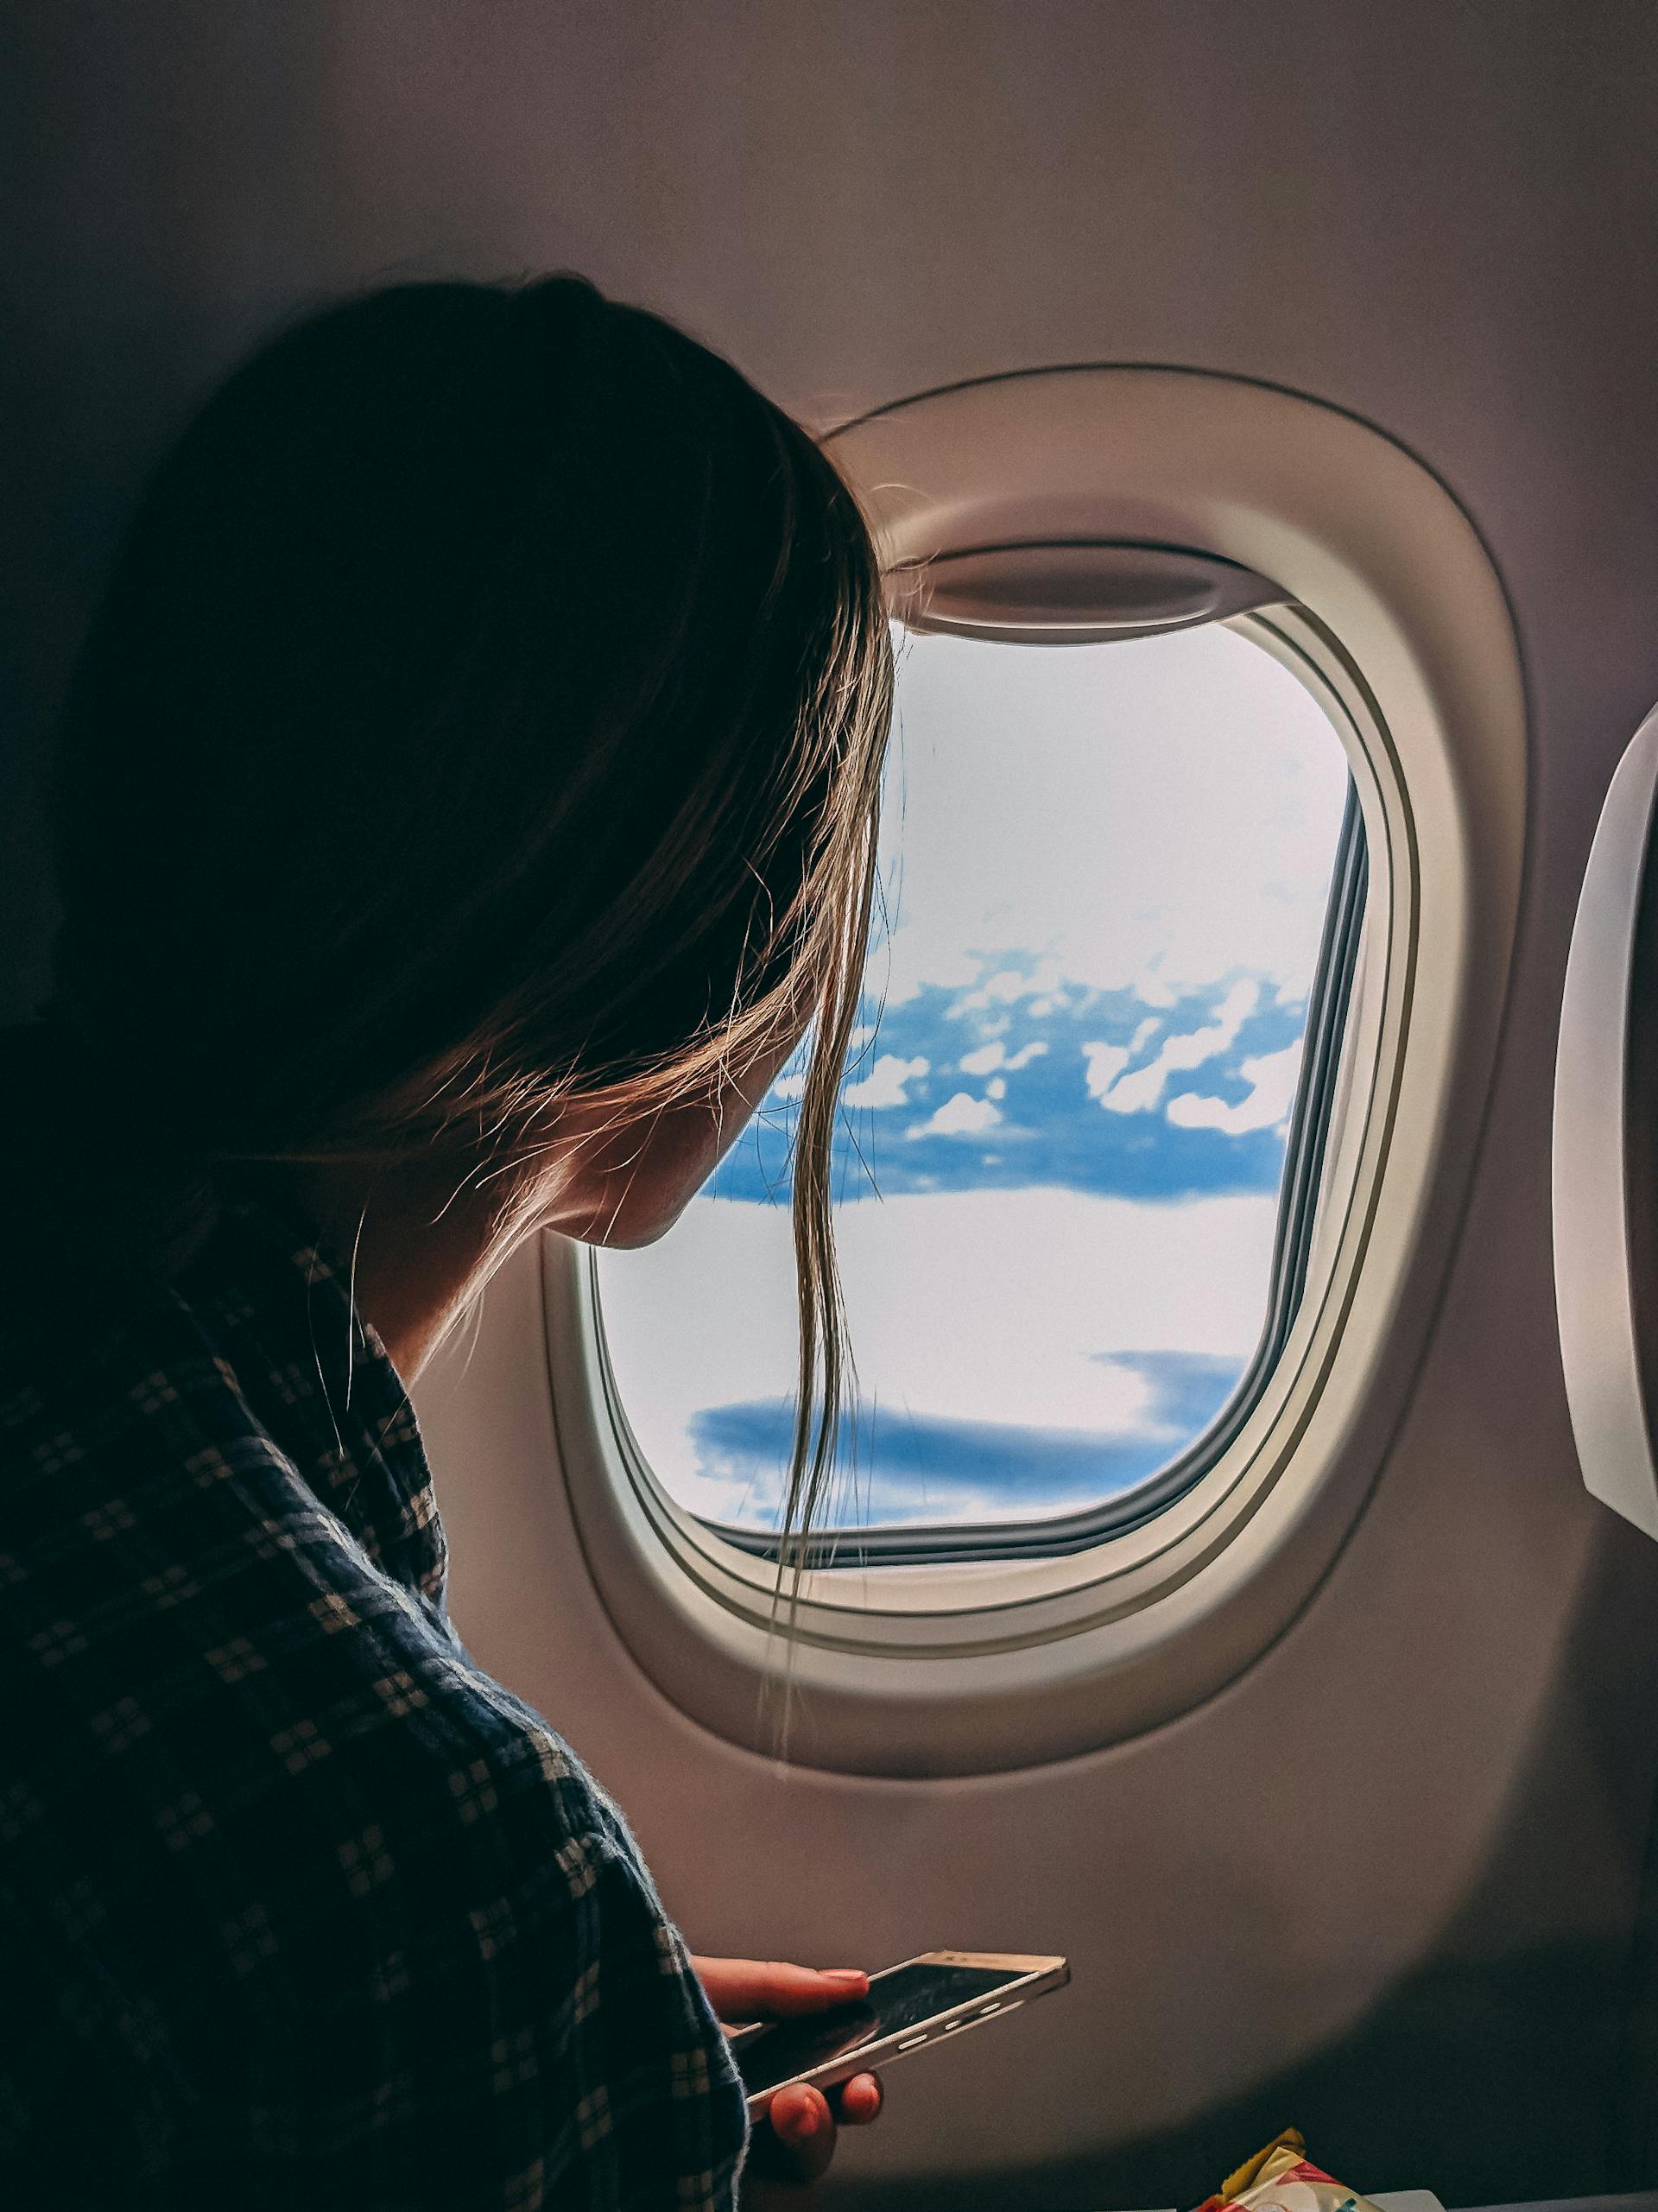 An unrecognizable woman holding her phone during a flight | Source: Pexels